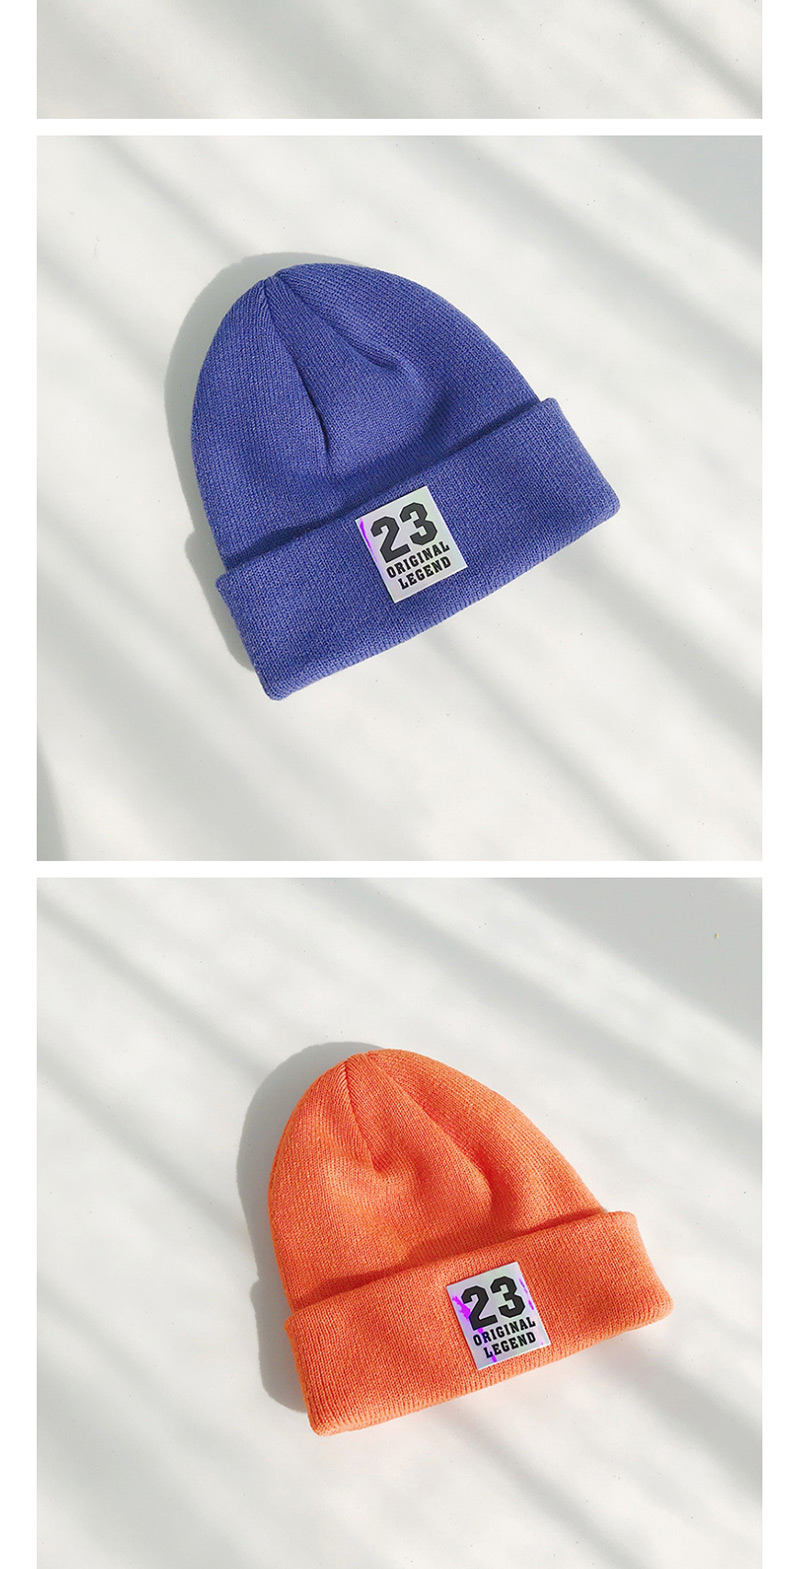 Fashion 23 Labeling Orange Pointed 23 Labeling Knitted Wool Cap,Knitting Wool Hats